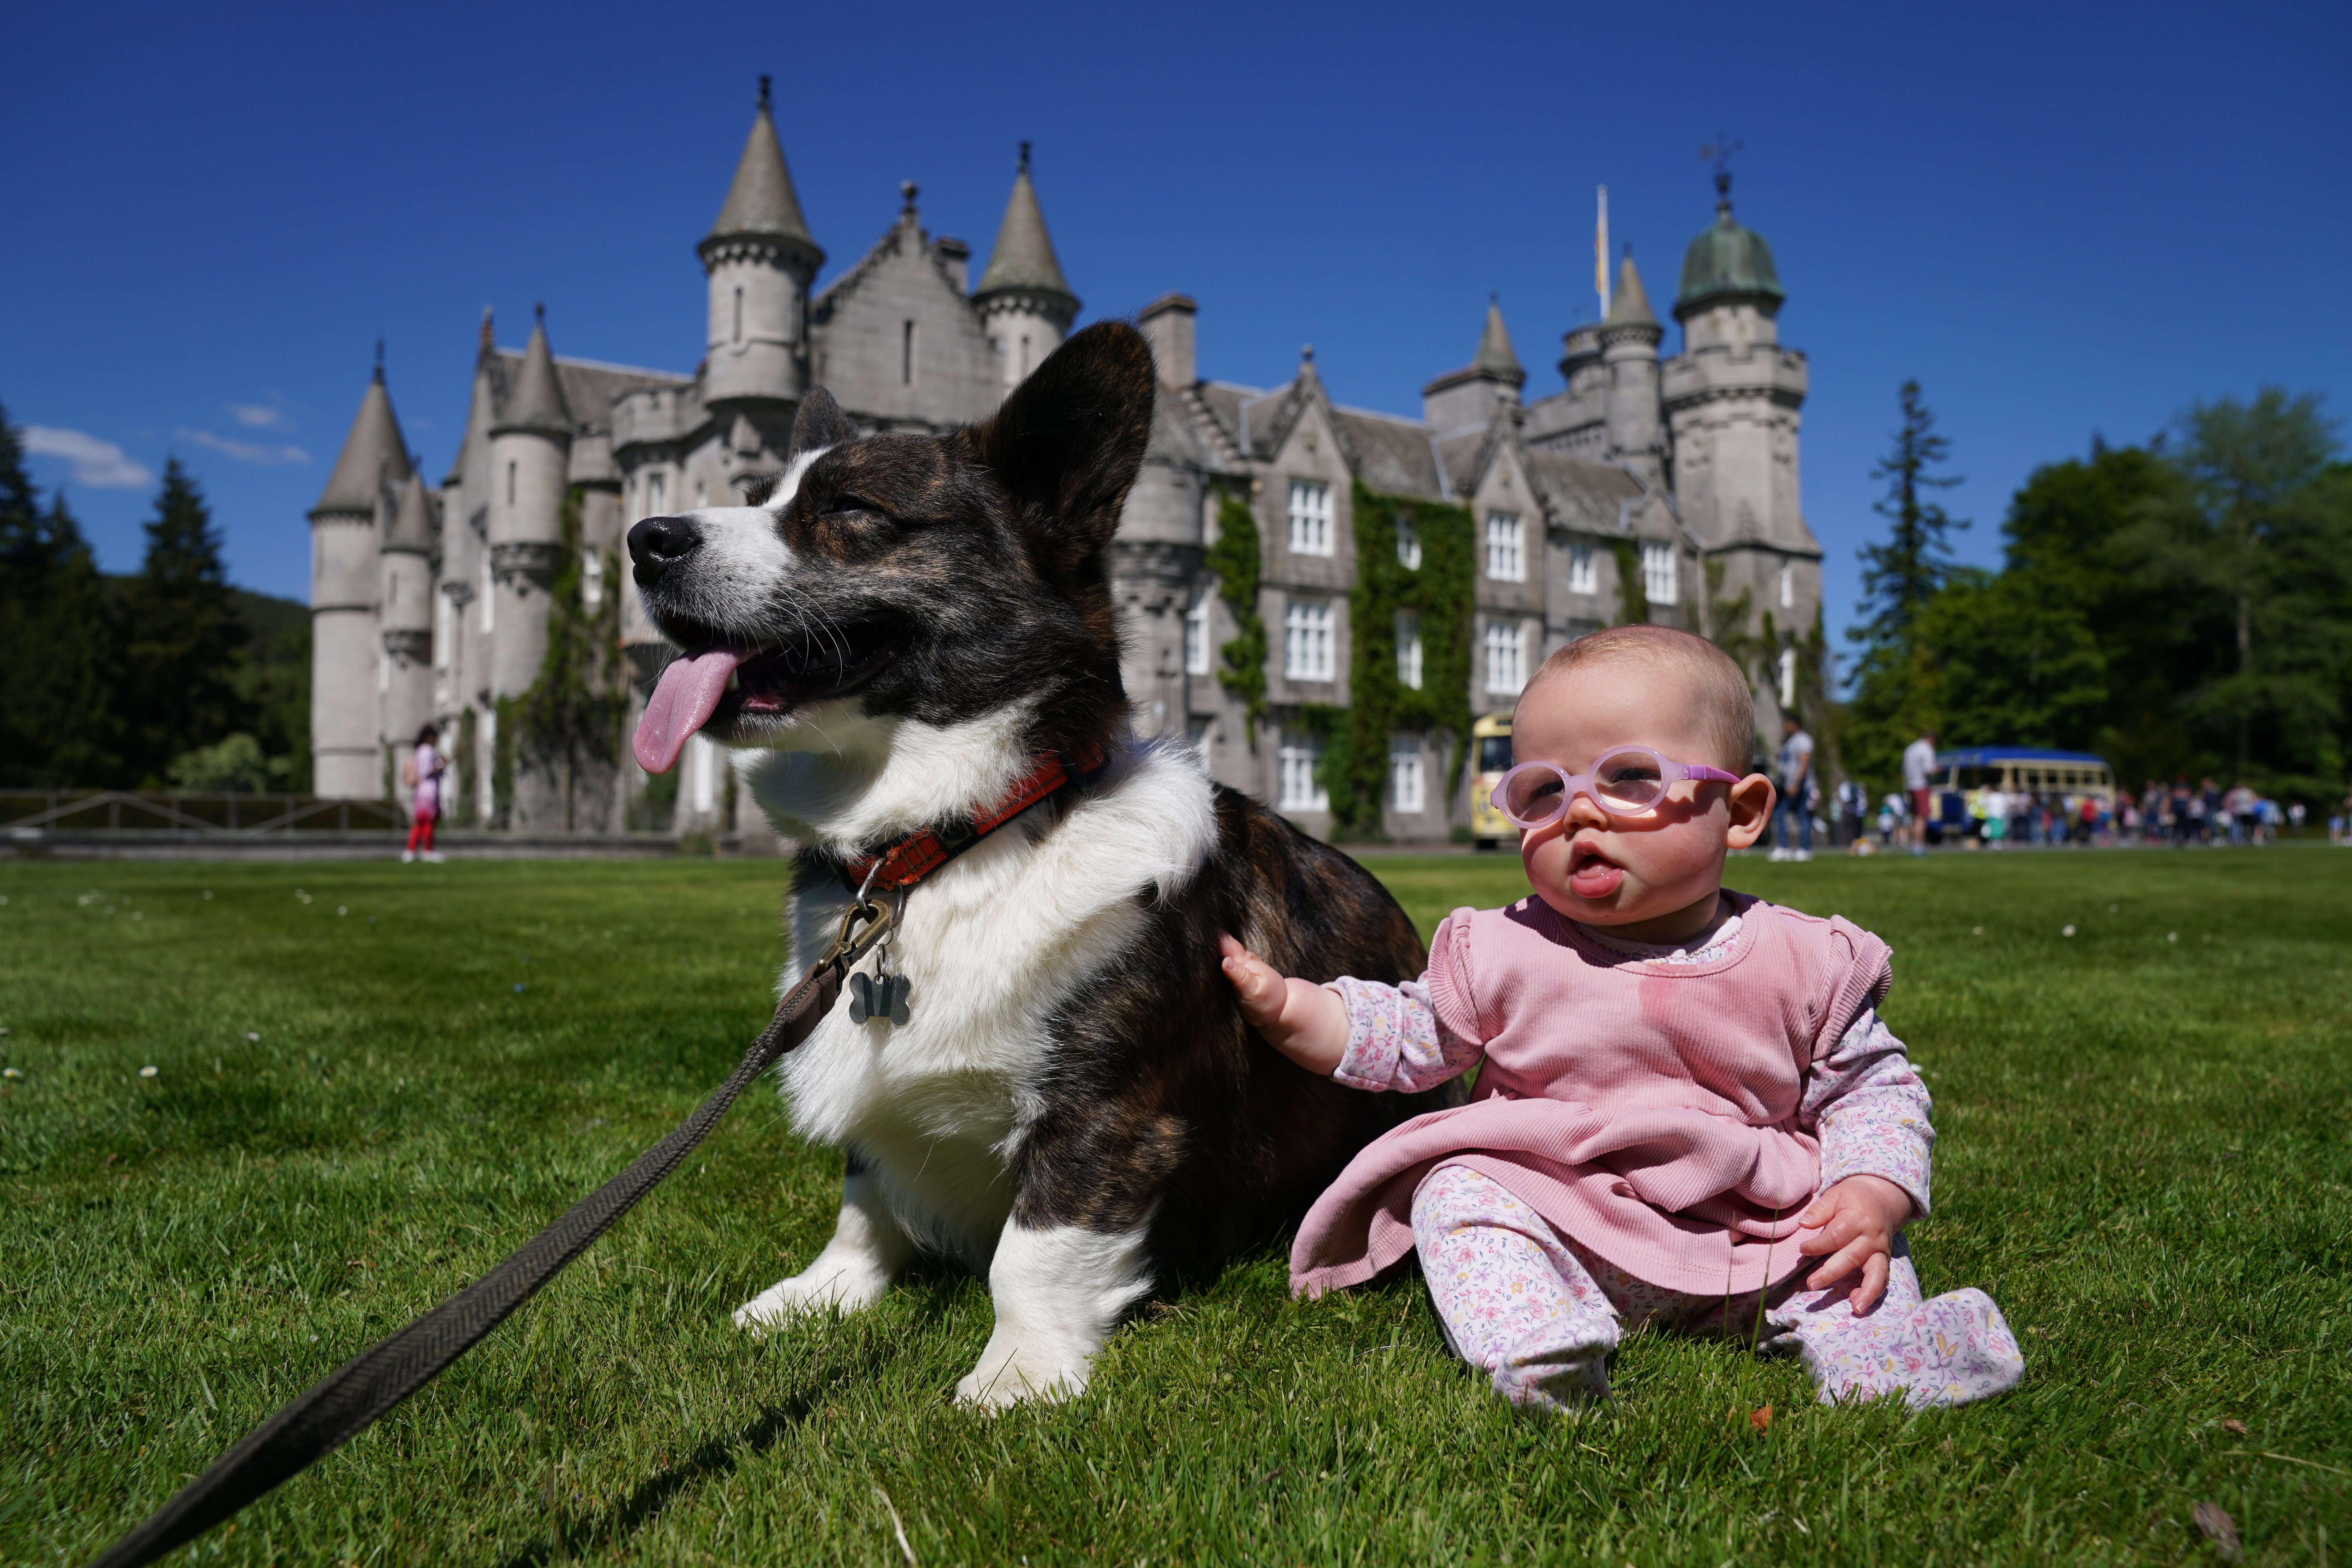 Joy Stephen with her corgi Marvin on the front lawn at Balmoral during an event with the Corgi Society of Scotland to mark the Queen's Platinum Jubilee on June 4, 2022. | Source: Getty Images